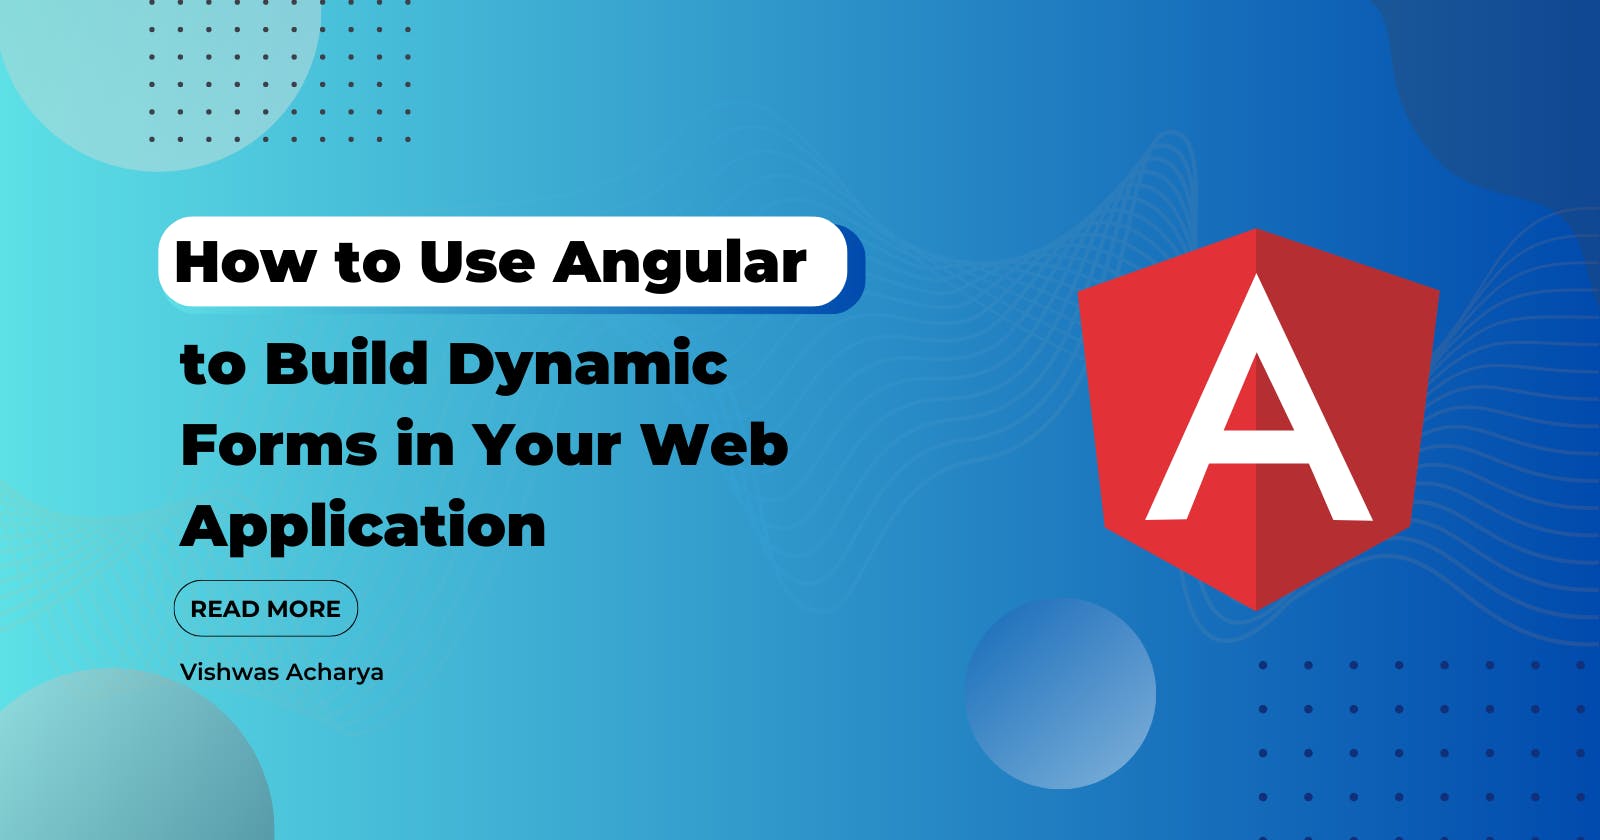 How to Use Angular to Build Dynamic Forms in Your Web Application